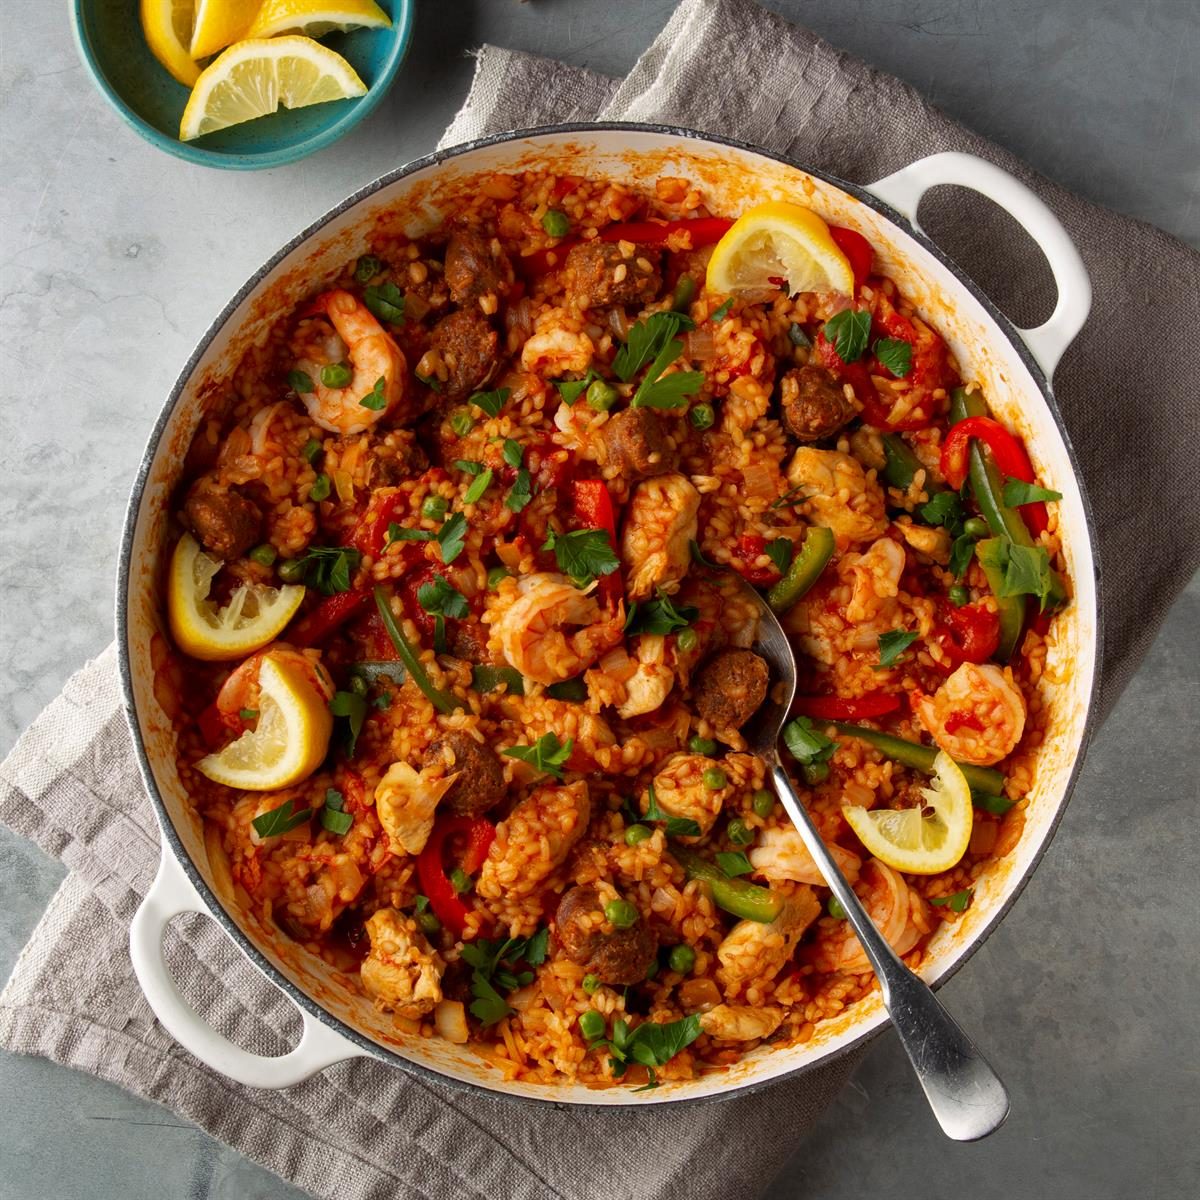 Spanish-Style Paella Recipe: How to Make It | Taste of Home